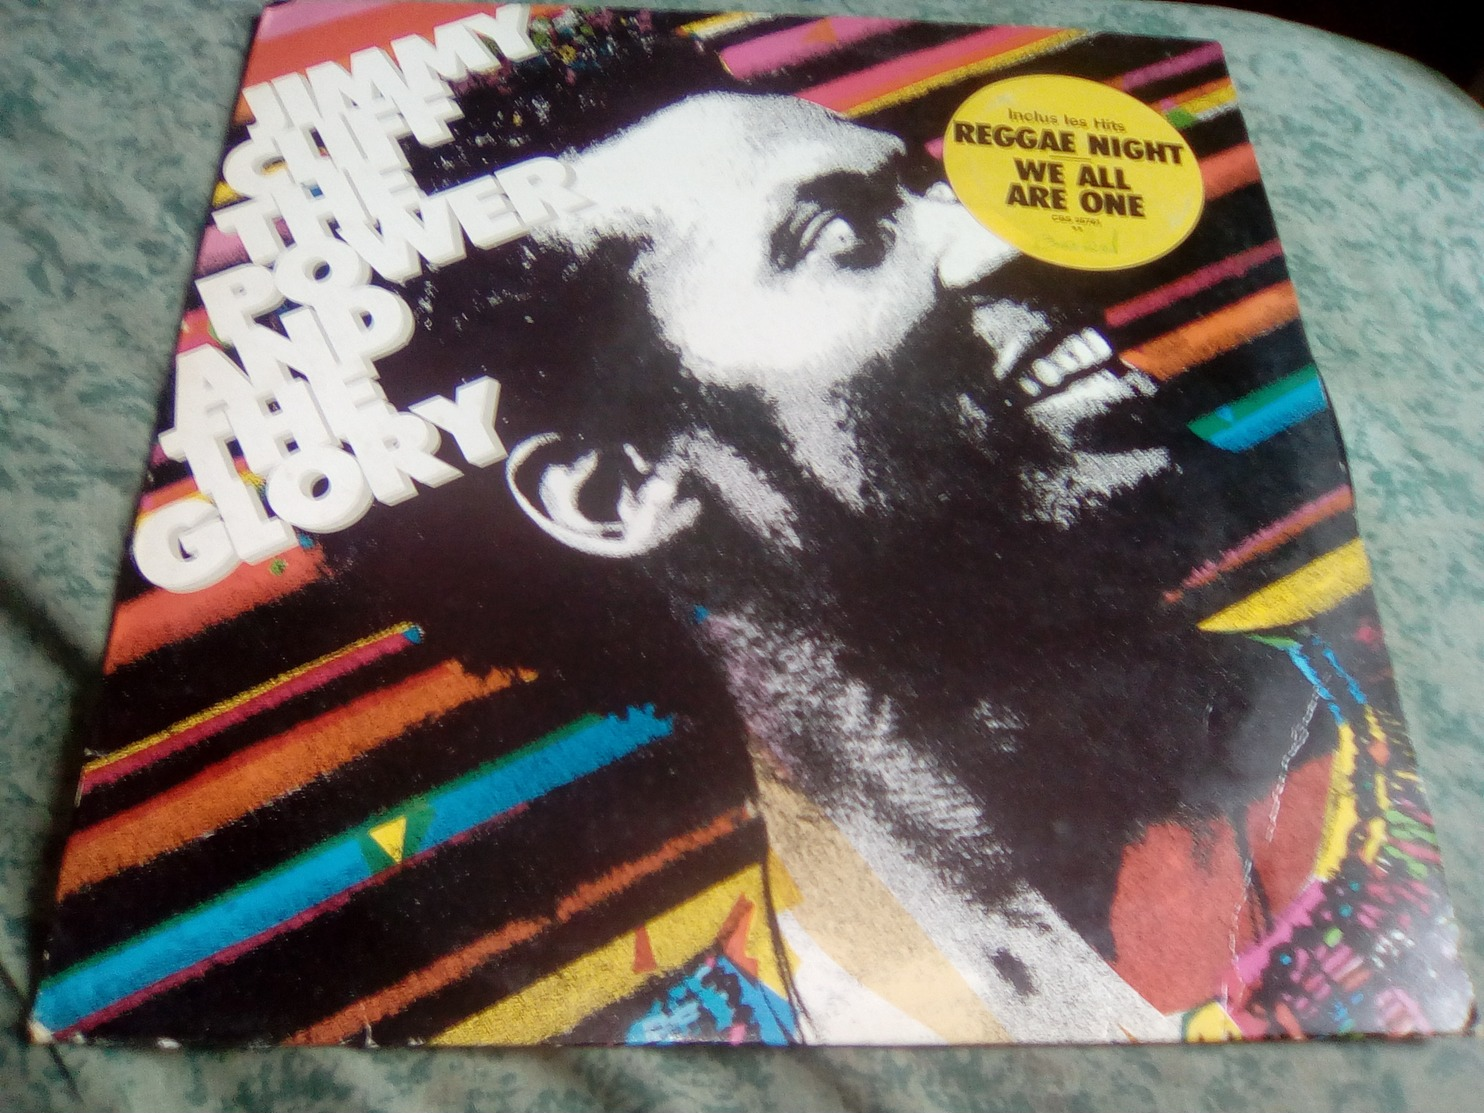 JIMMY CLIFF "The Power And The Glory" - Reggae